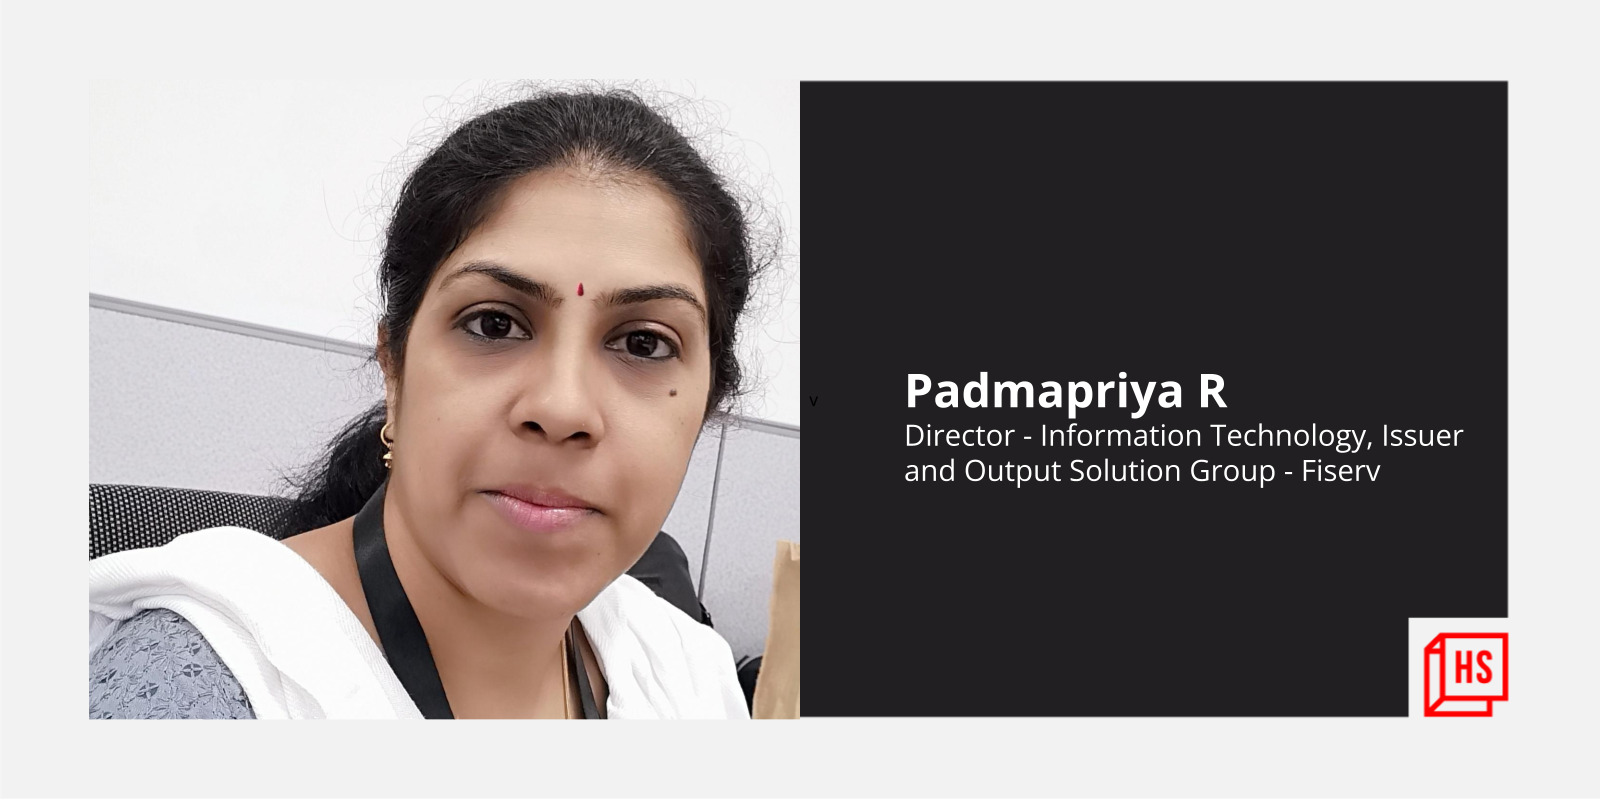 [Women in Tech] Cultivate relationships with your peers and seek mentorship from other women, says Padmapriya R of Fiserv

